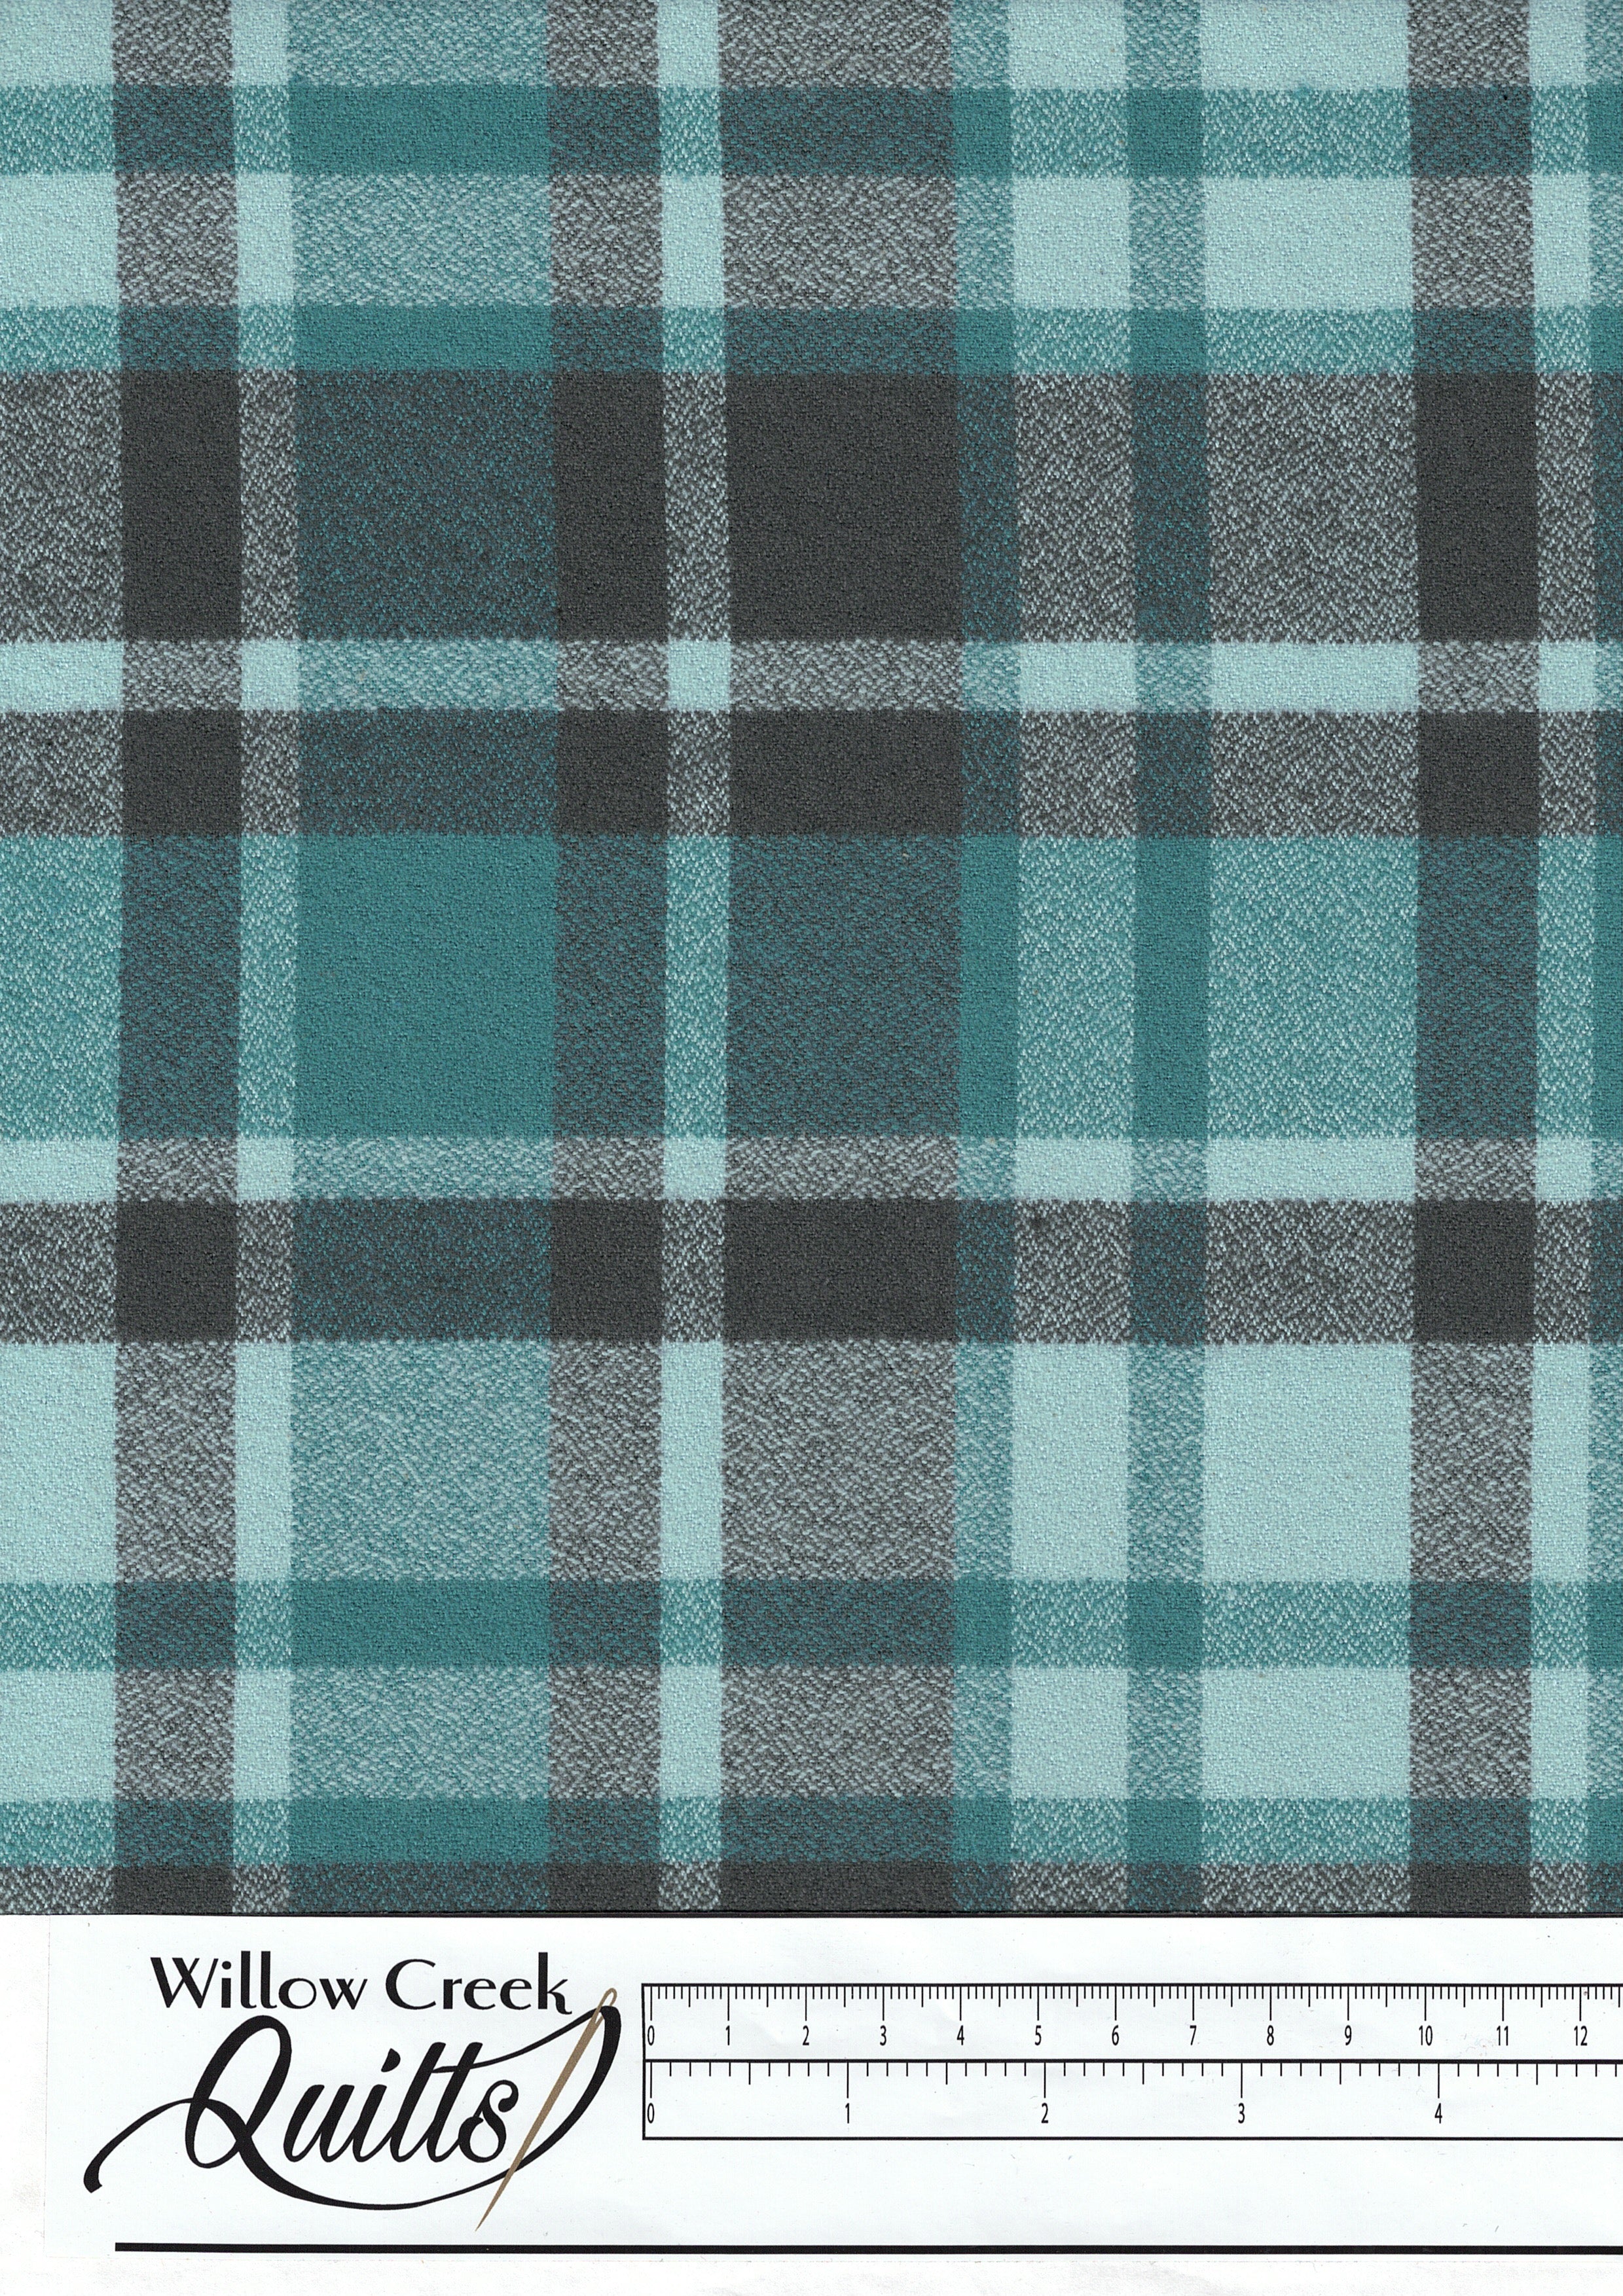 Mammoth Flannel - Teal - 21395-213